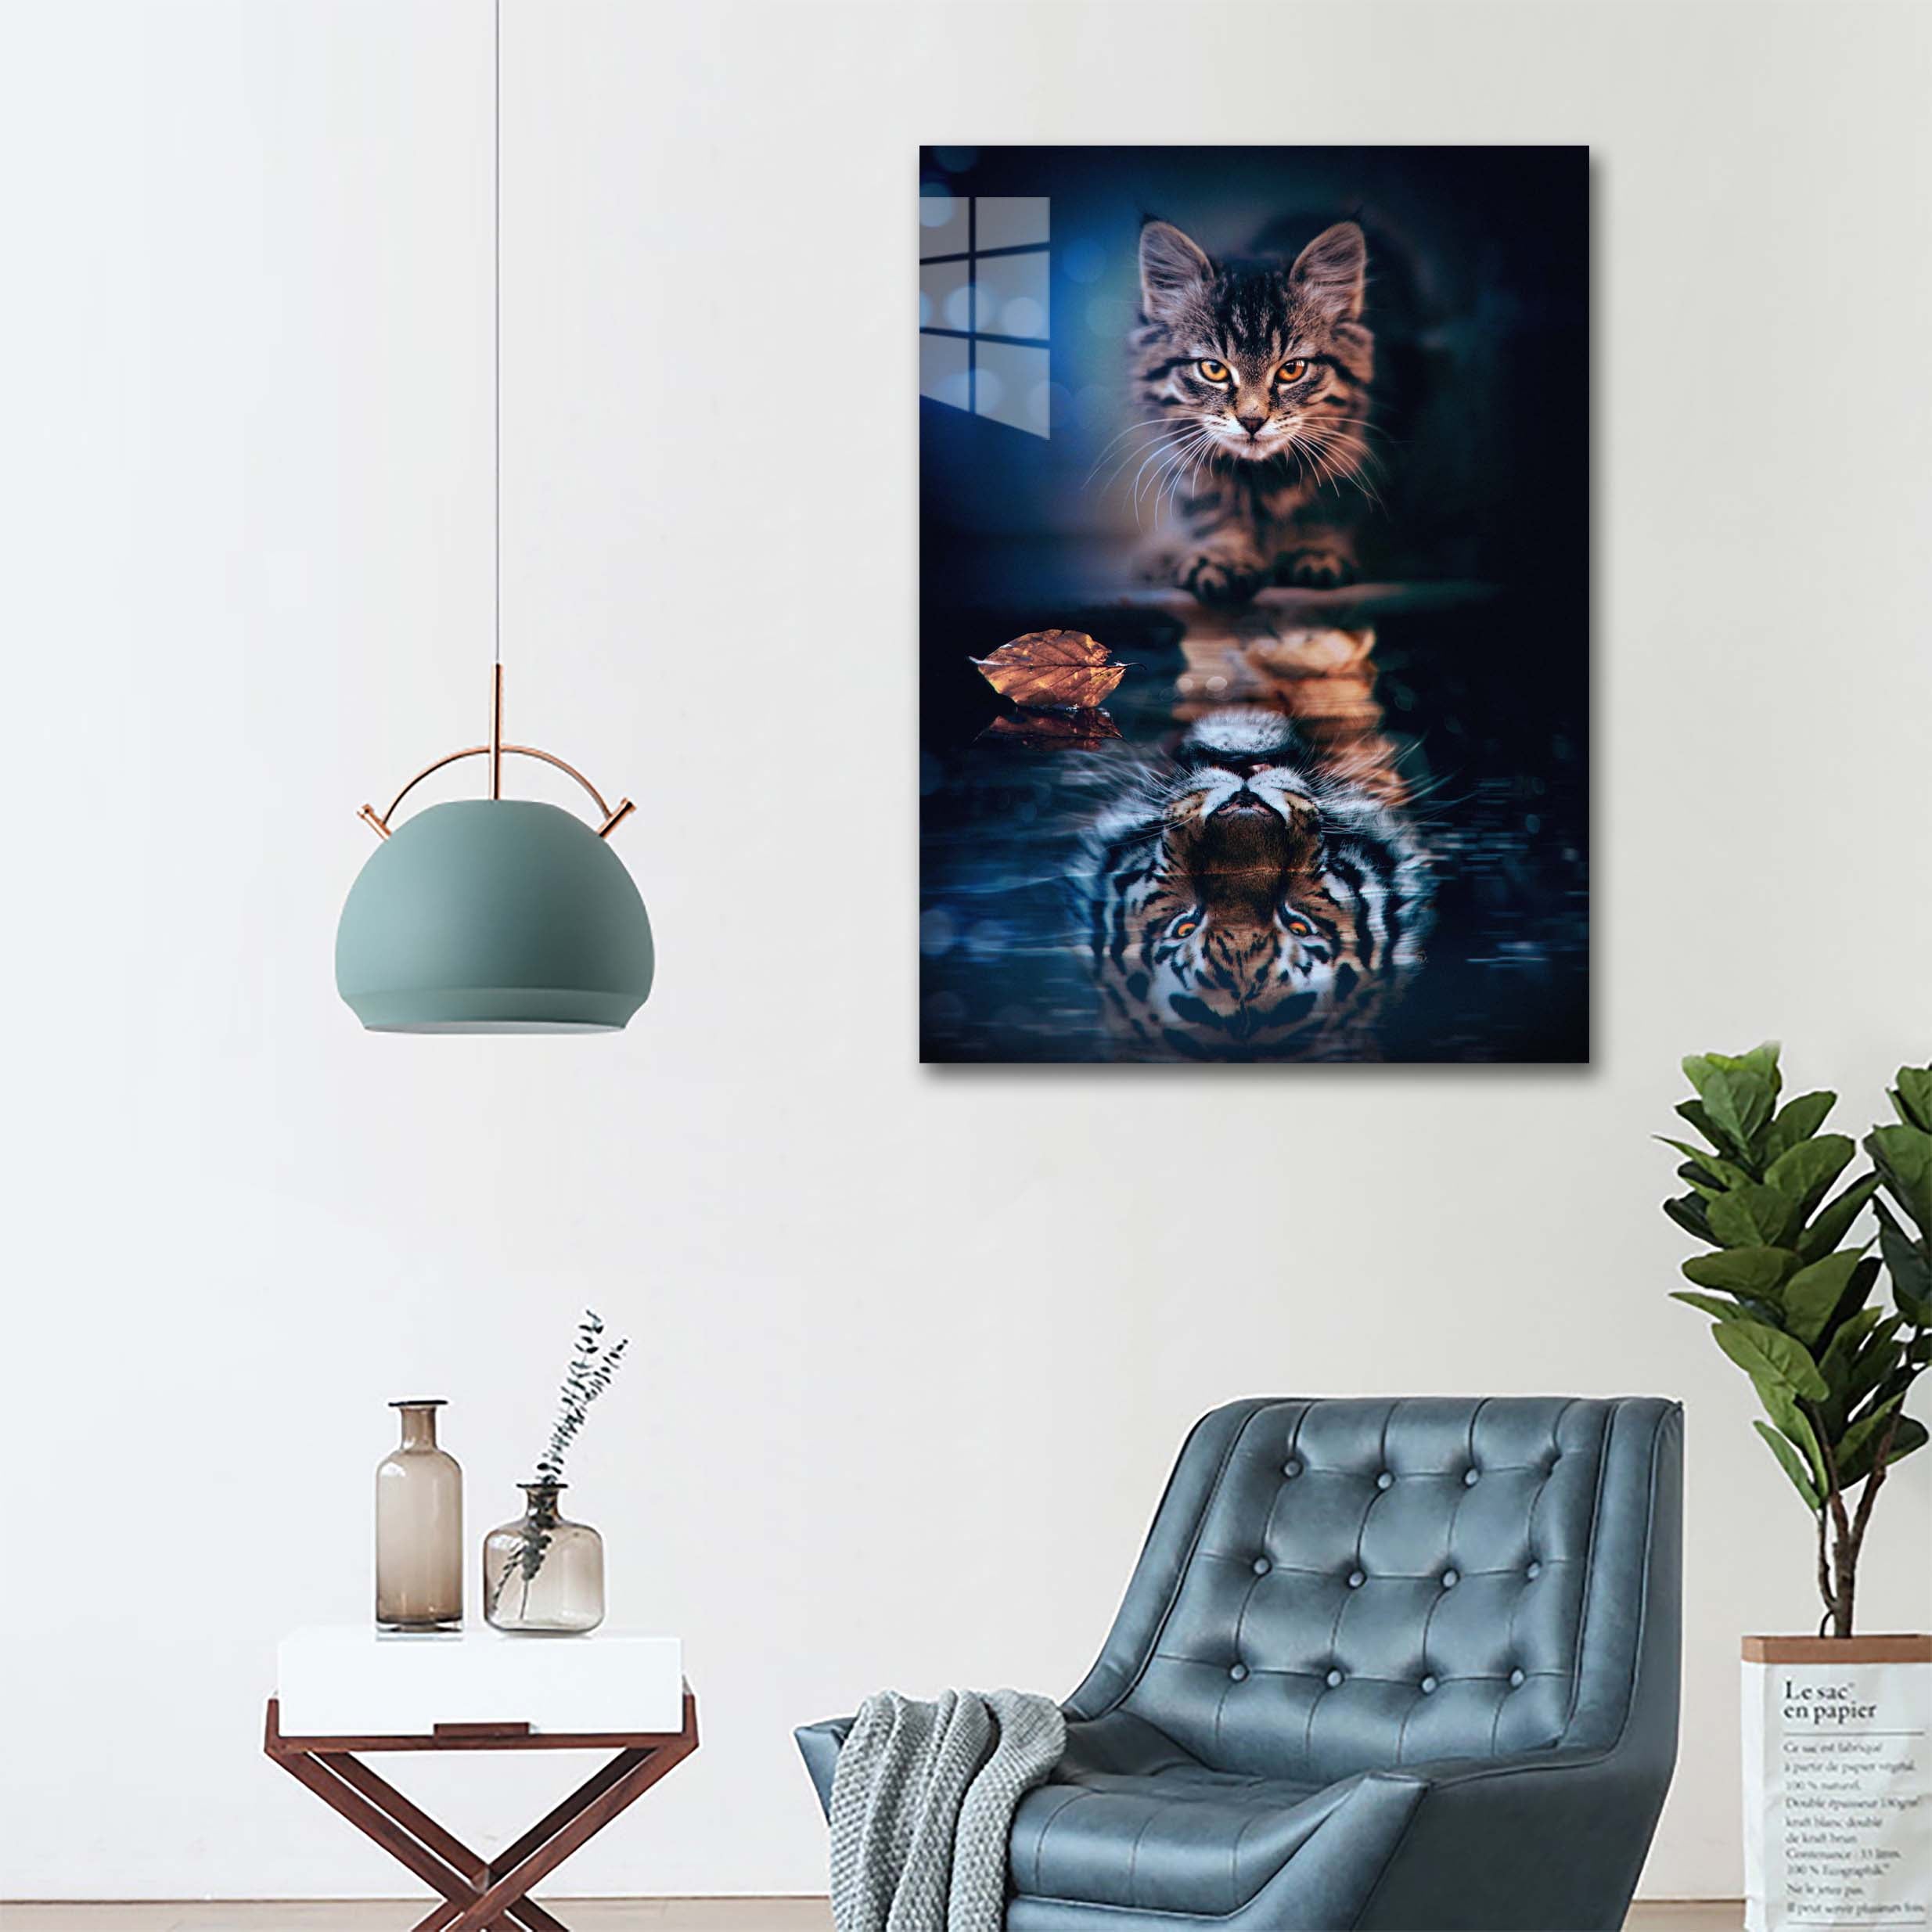 Tiger and cat Mirror-designed by @Puffy Design